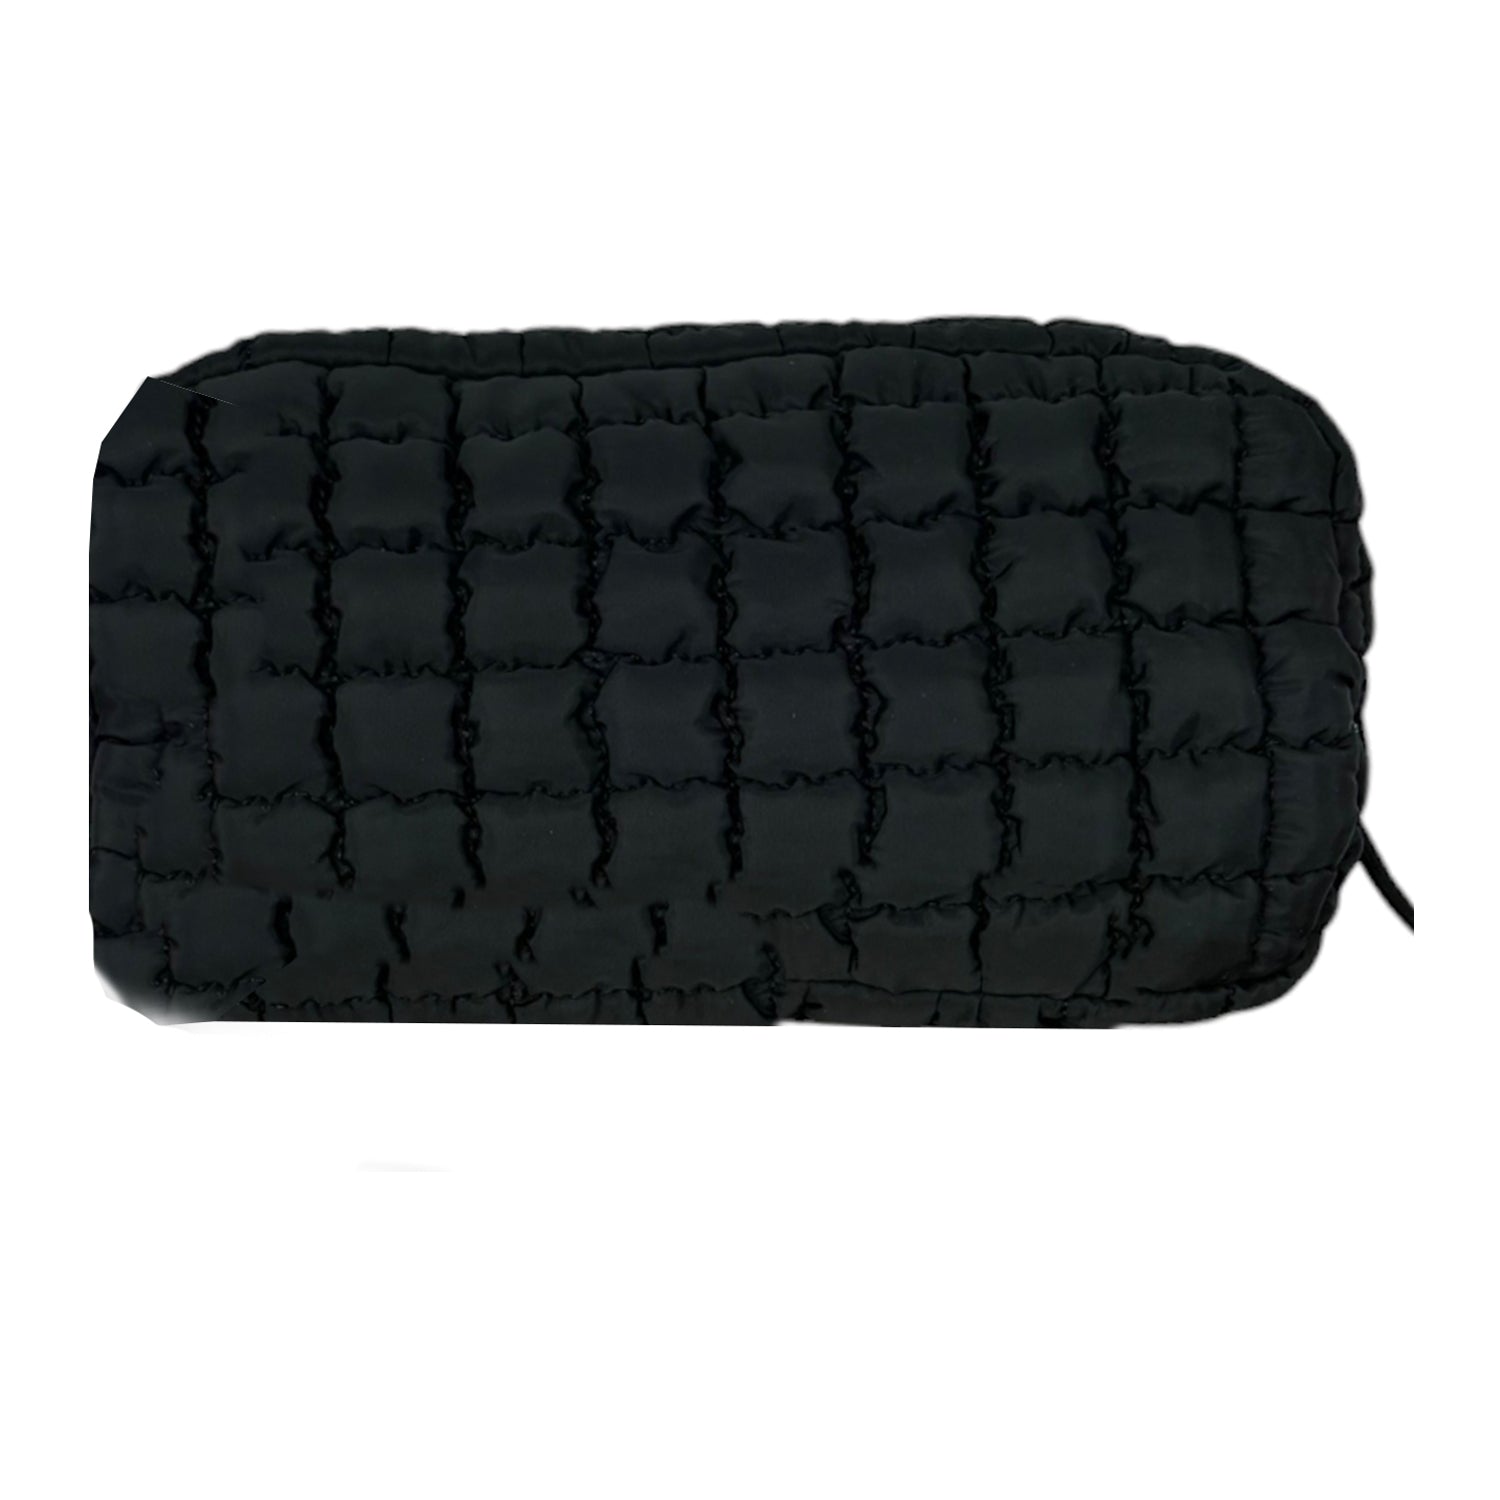 GZ-4282 Puffer Quilted Makeup Bag Black